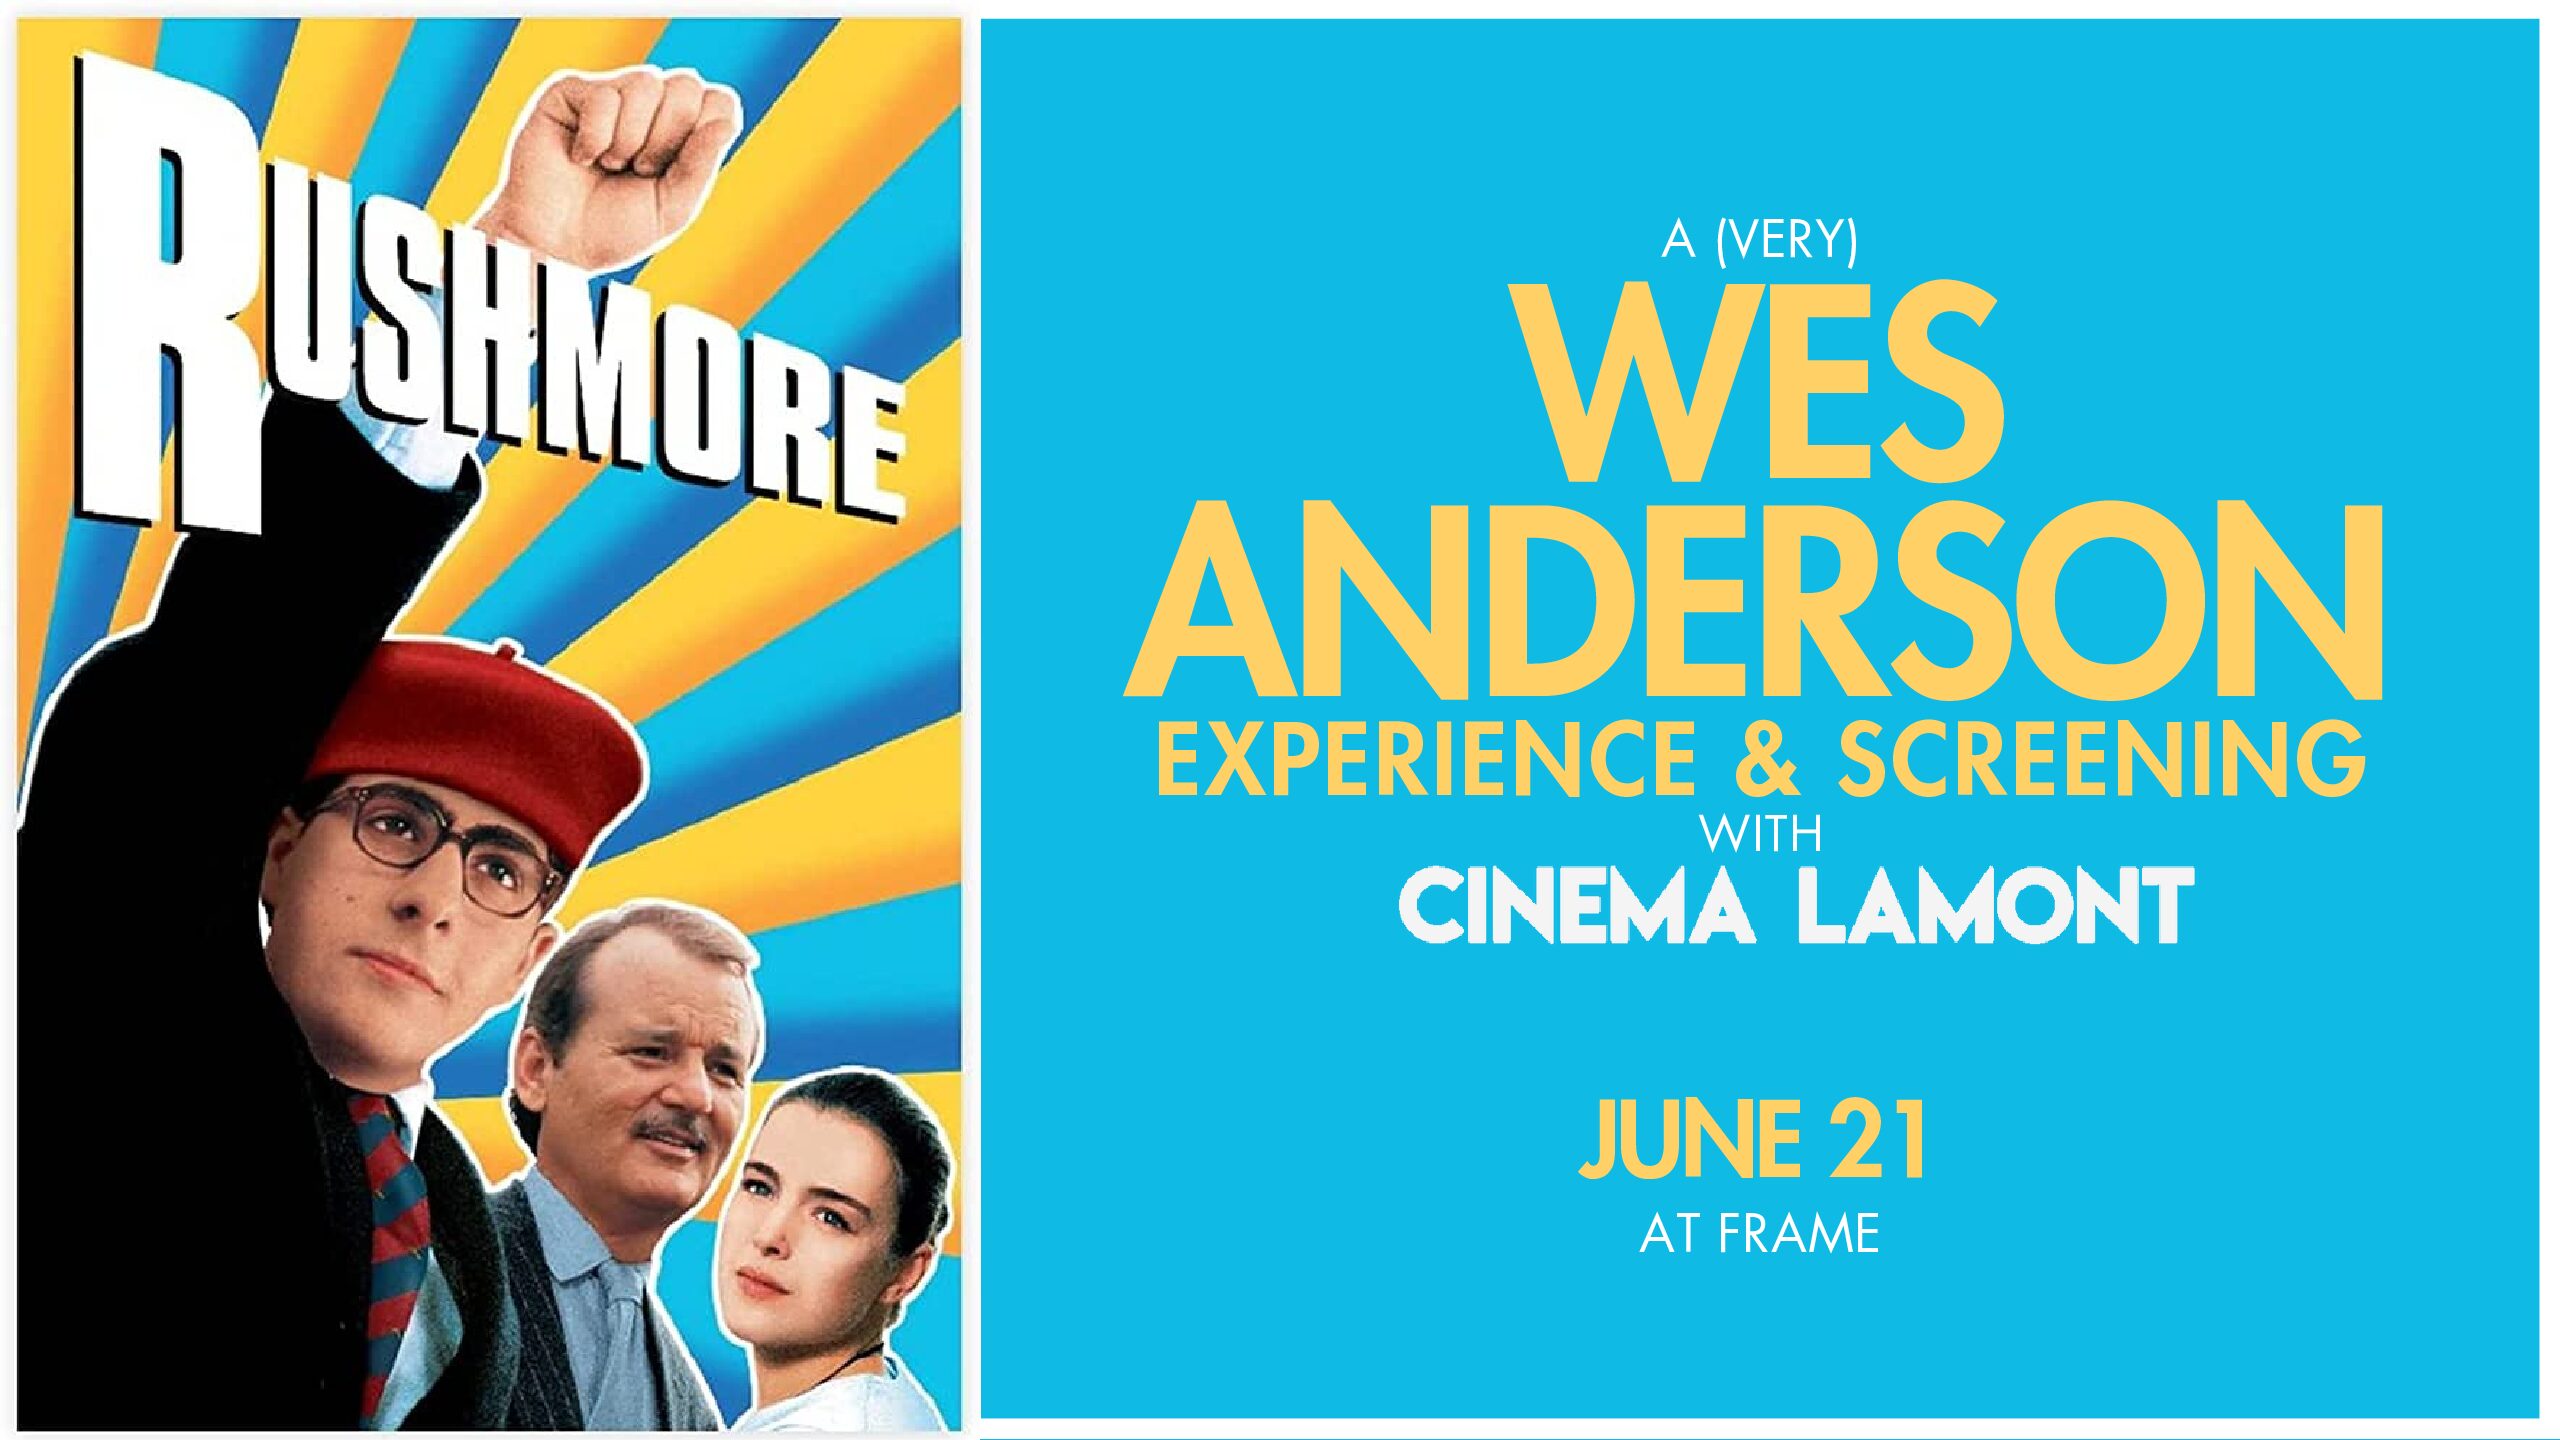 Wes Anderson experience and screening